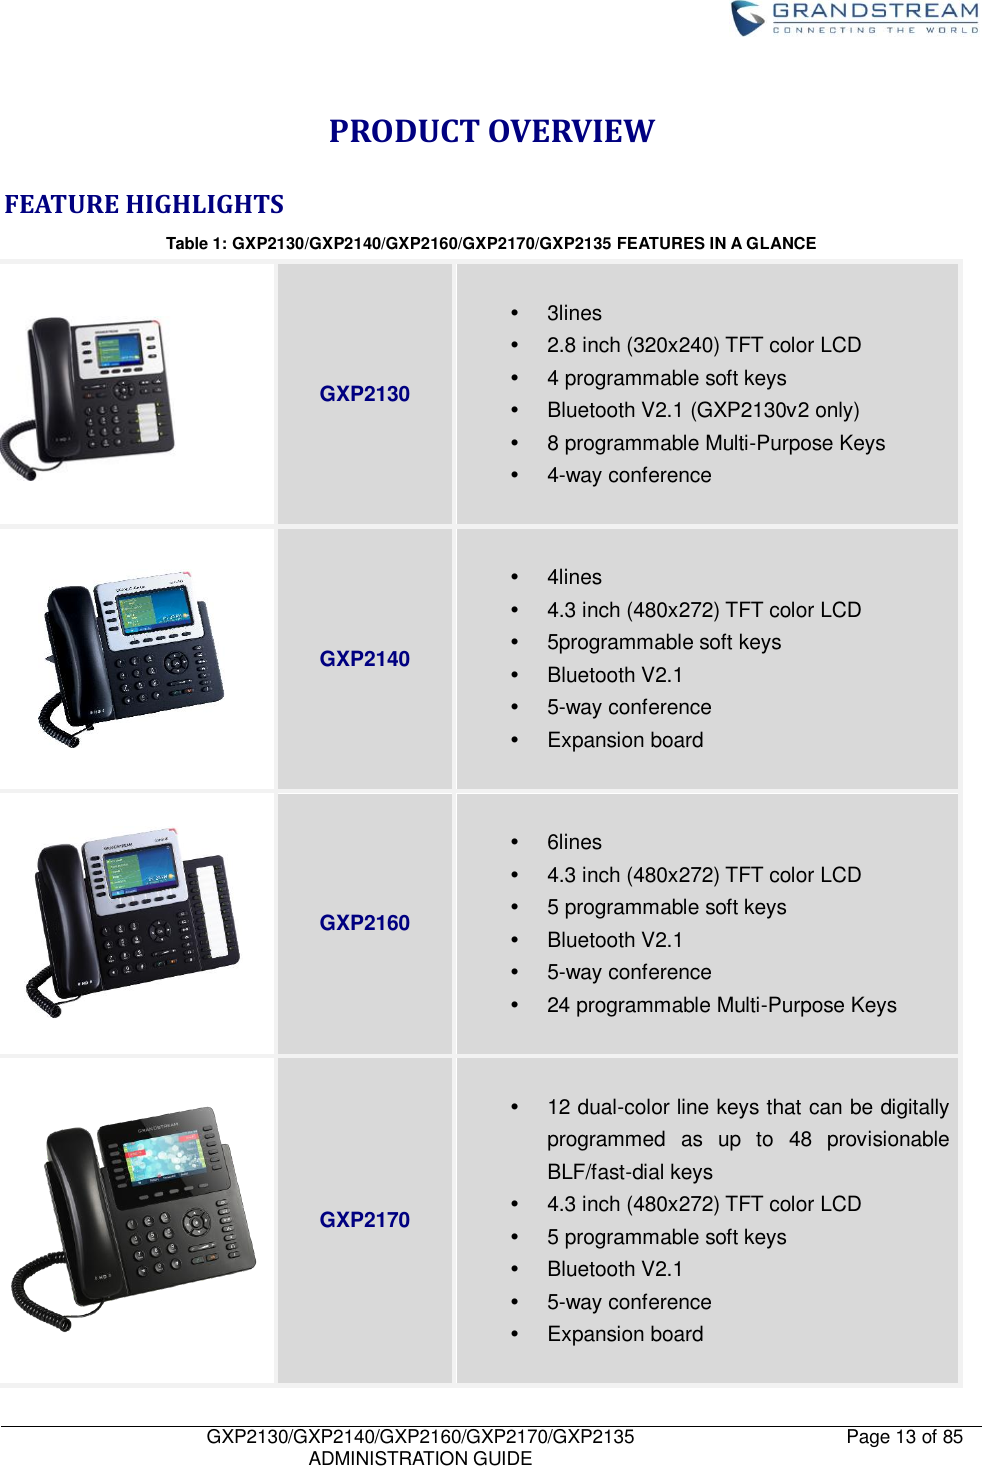    GXP2130/GXP2140/GXP2160/GXP2170/GXP2135   ADMINISTRATION GUIDE Page 13 of 85     PRODUCT OVERVIEW FEATURE HIGHLIGHTS Table 1: GXP2130/GXP2140/GXP2160/GXP2170/GXP2135 FEATURES IN A GLANCE   GXP2130    3lines   2.8 inch (320x240) TFT color LCD   4 programmable soft keys   Bluetooth V2.1 (GXP2130v2 only)   8 programmable Multi-Purpose Keys     4-way conference    GXP2140    4lines   4.3 inch (480x272) TFT color LCD   5programmable soft keys   Bluetooth V2.1   5-way conference   Expansion board    GXP2160    6lines   4.3 inch (480x272) TFT color LCD   5 programmable soft keys   Bluetooth V2.1   5-way conference  24 programmable Multi-Purpose Keys     GXP2170    12 dual-color line keys that can be digitally programmed  as  up  to  48  provisionable BLF/fast-dial keys   4.3 inch (480x272) TFT color LCD   5 programmable soft keys   Bluetooth V2.1   5-way conference   Expansion board  